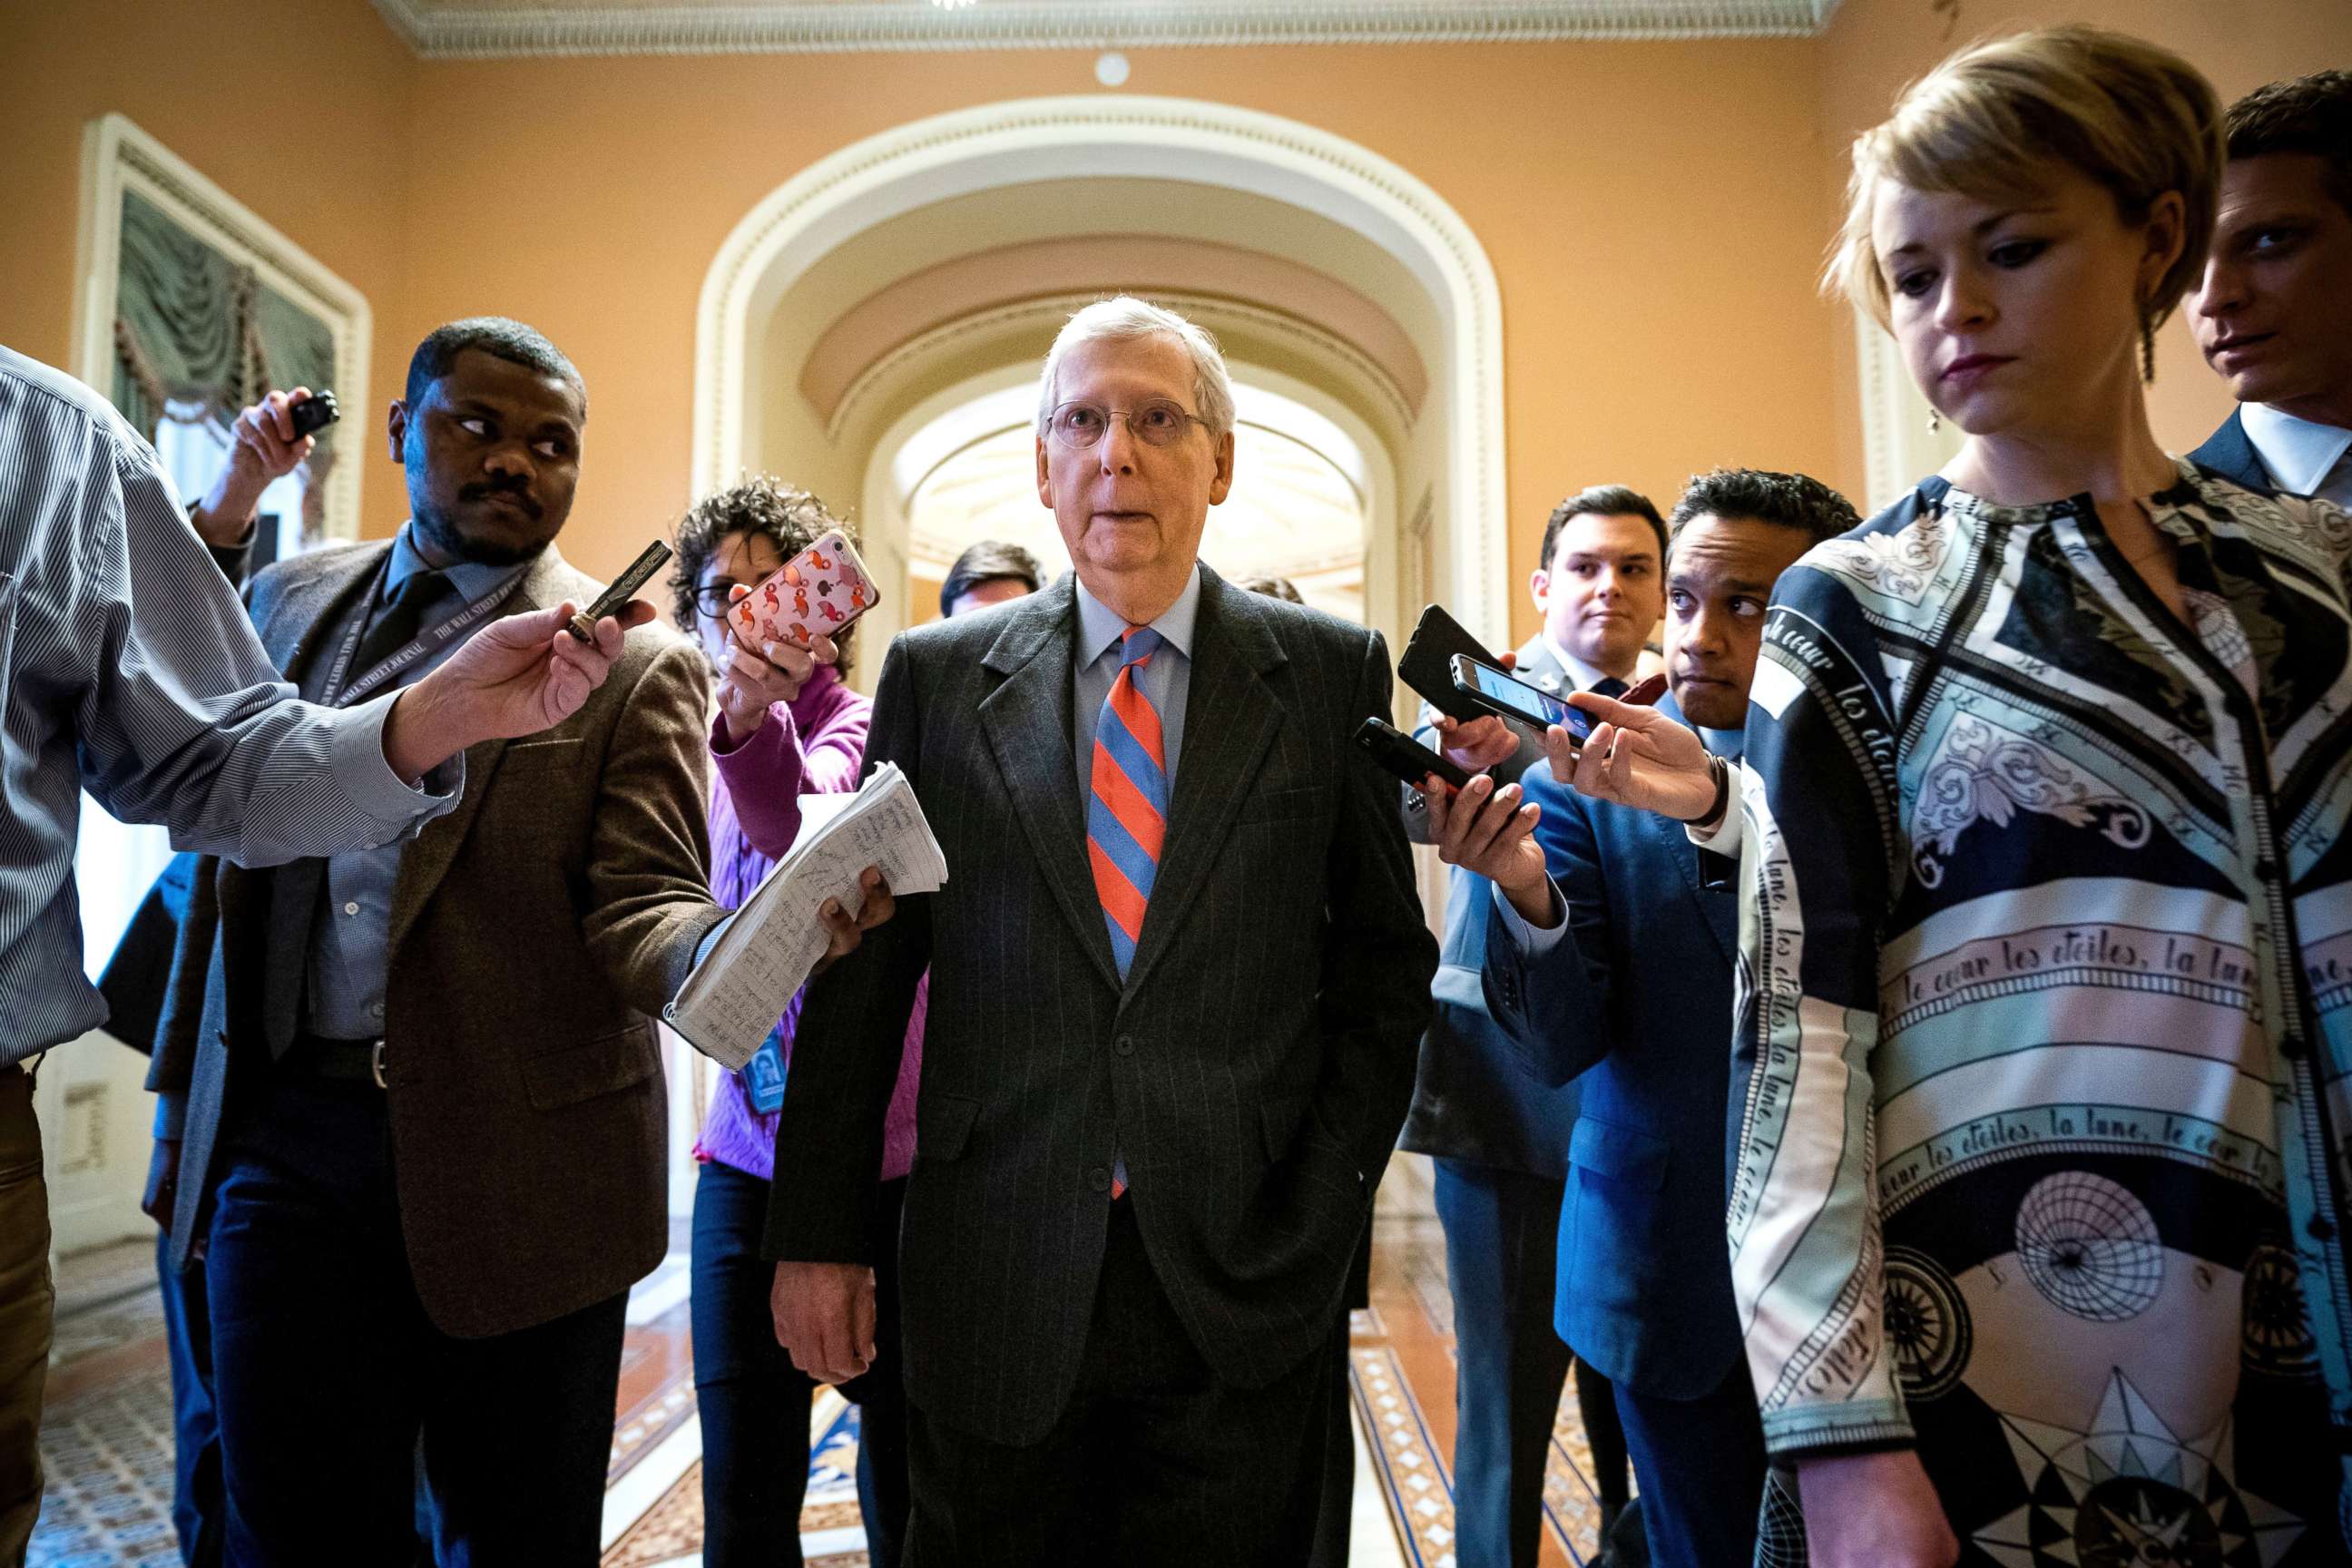 PHOTO: Republican Senate Majority Leader Mitch McConnell leaves the Senate floor after the vote on a budget bill that could avert a government shutdown at the US Capitol in Washington, Feb. 14, 2019.